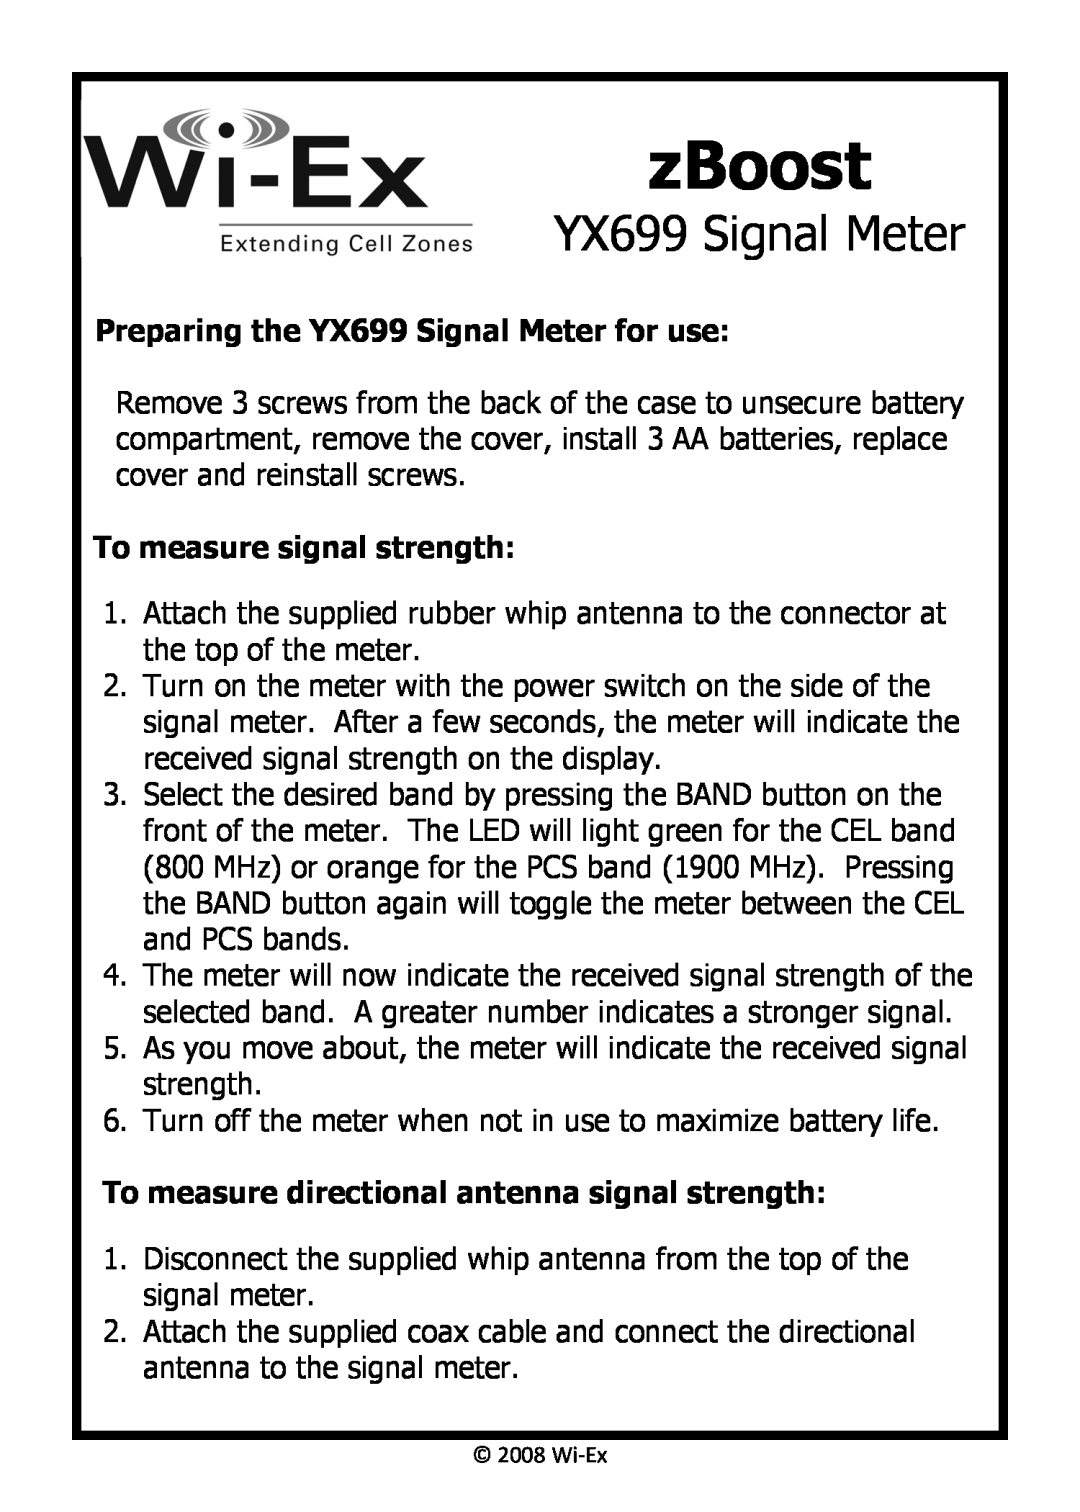 Wi-Ex manual zBoost, Preparing the YX699 Signal Meter for use, To measure signal strength 